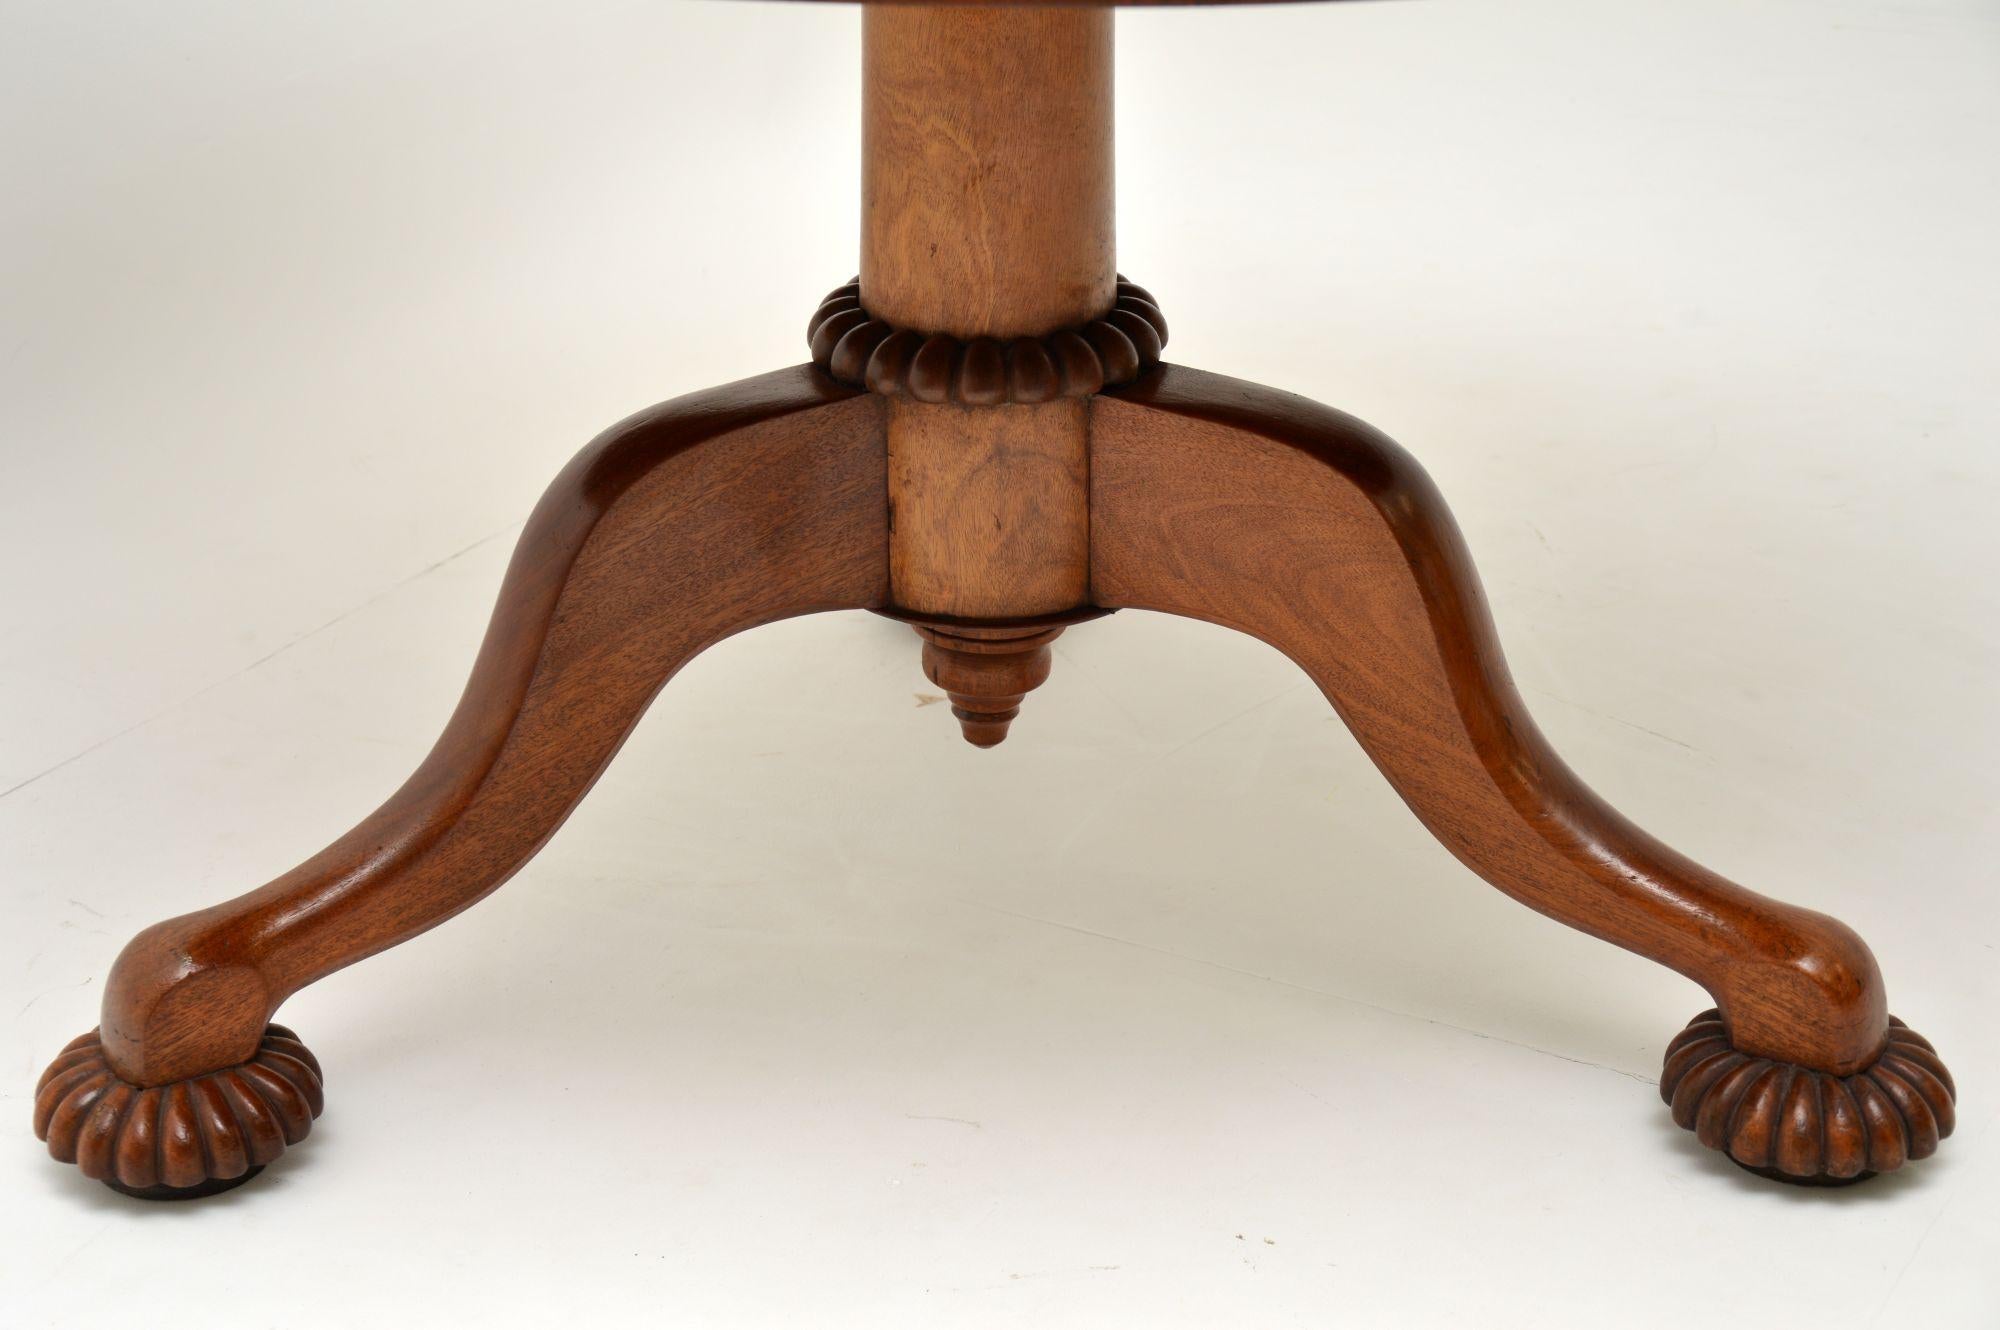 Antique William IV mahogany dining table or centre table, which can also be tilted up when not in use. It’s a very strong looking table and is sturdy too. The condition is excellent and it dates to circa 1830-1840 period. The solid mahogany base has